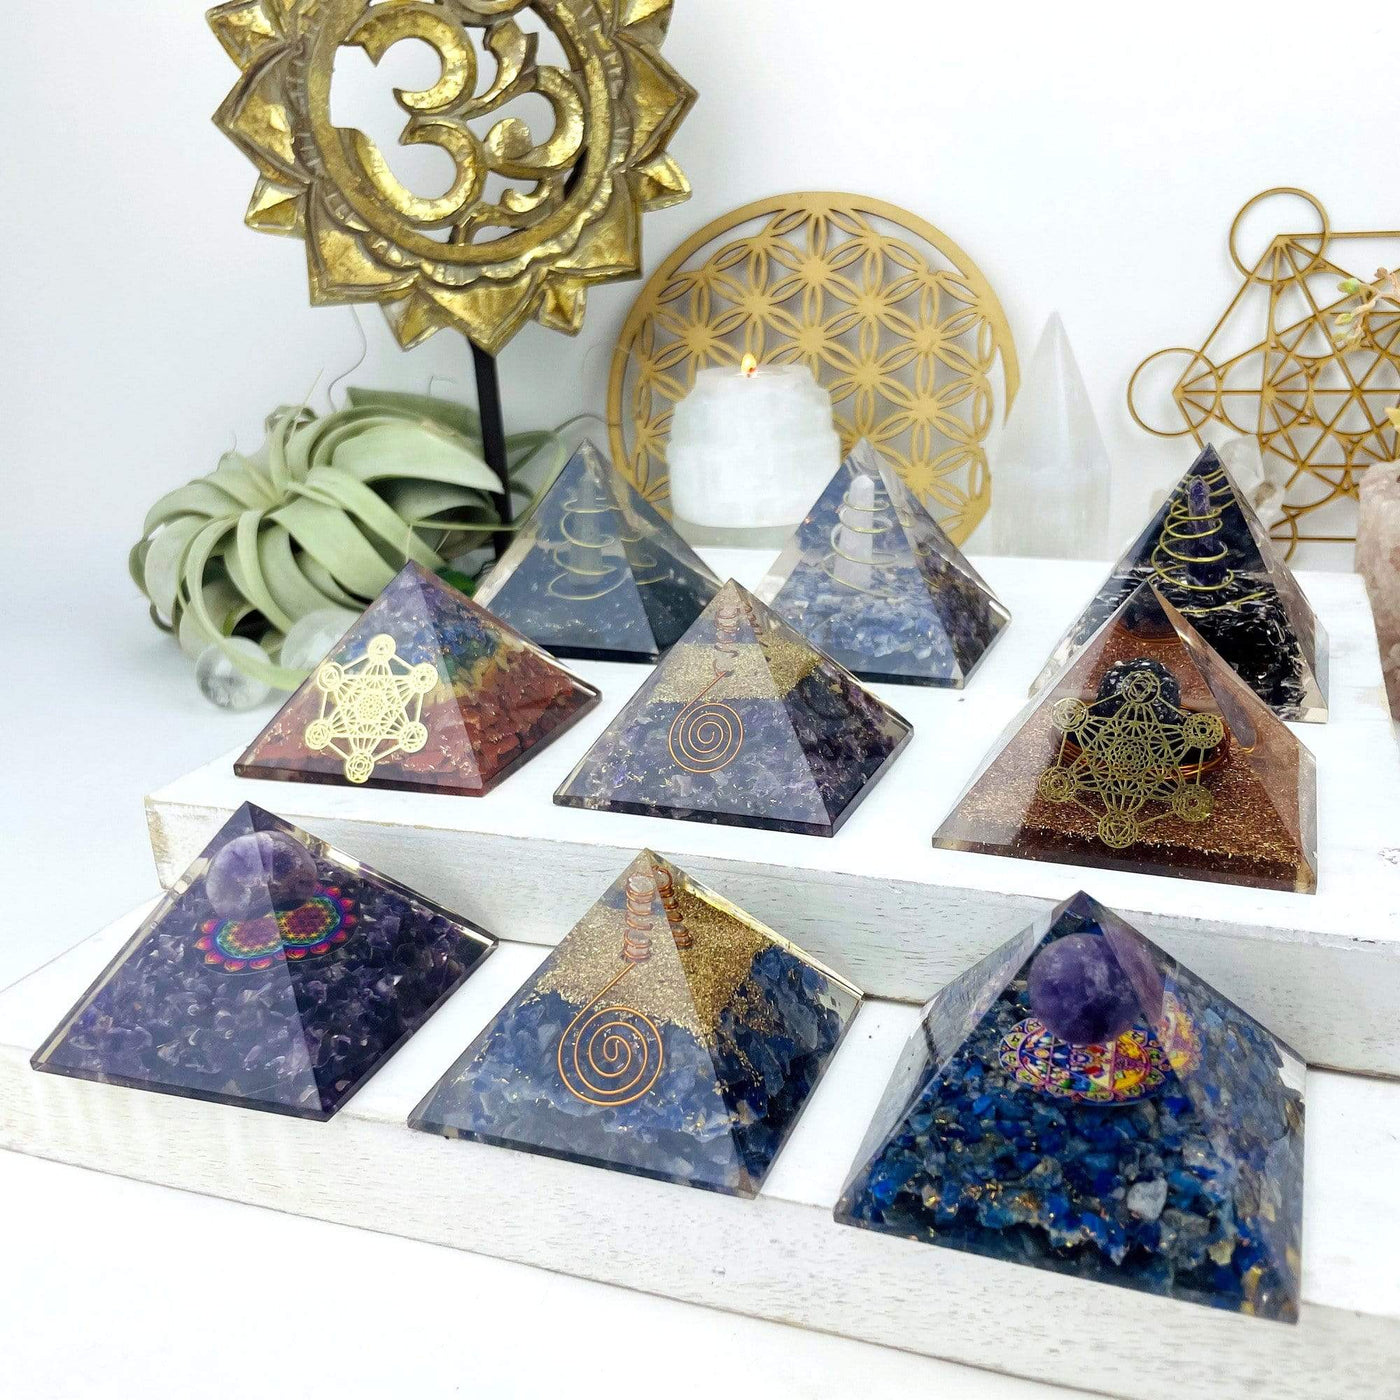 9 different Orgone Crystal Point Pyramids displayed, all containing different stones inside.